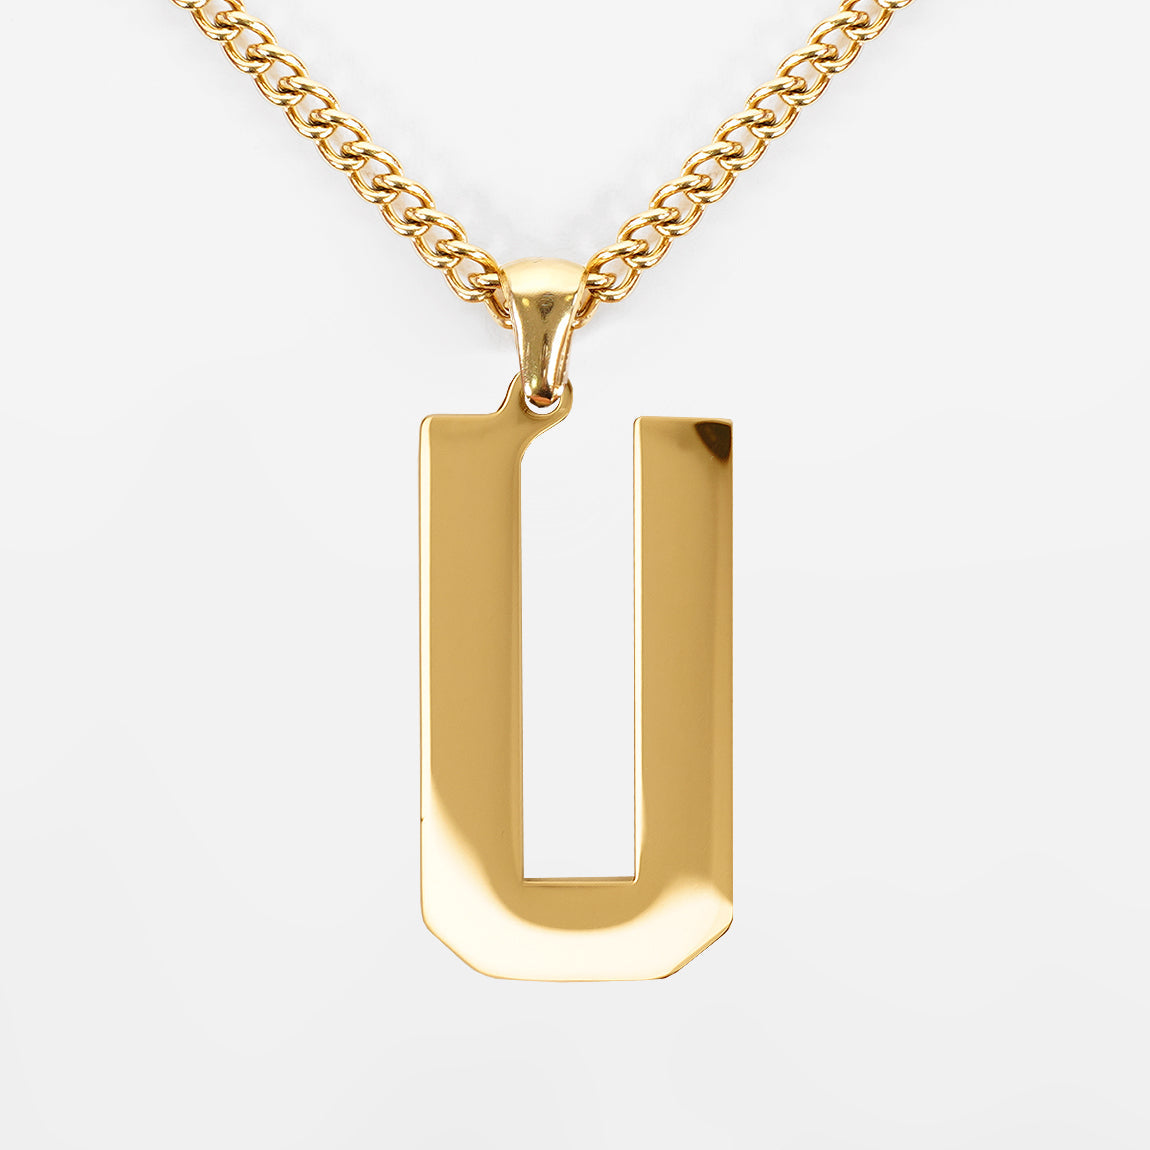 U Letter Pendant with Chain Kids Necklace - Gold Plated Stainless Steel